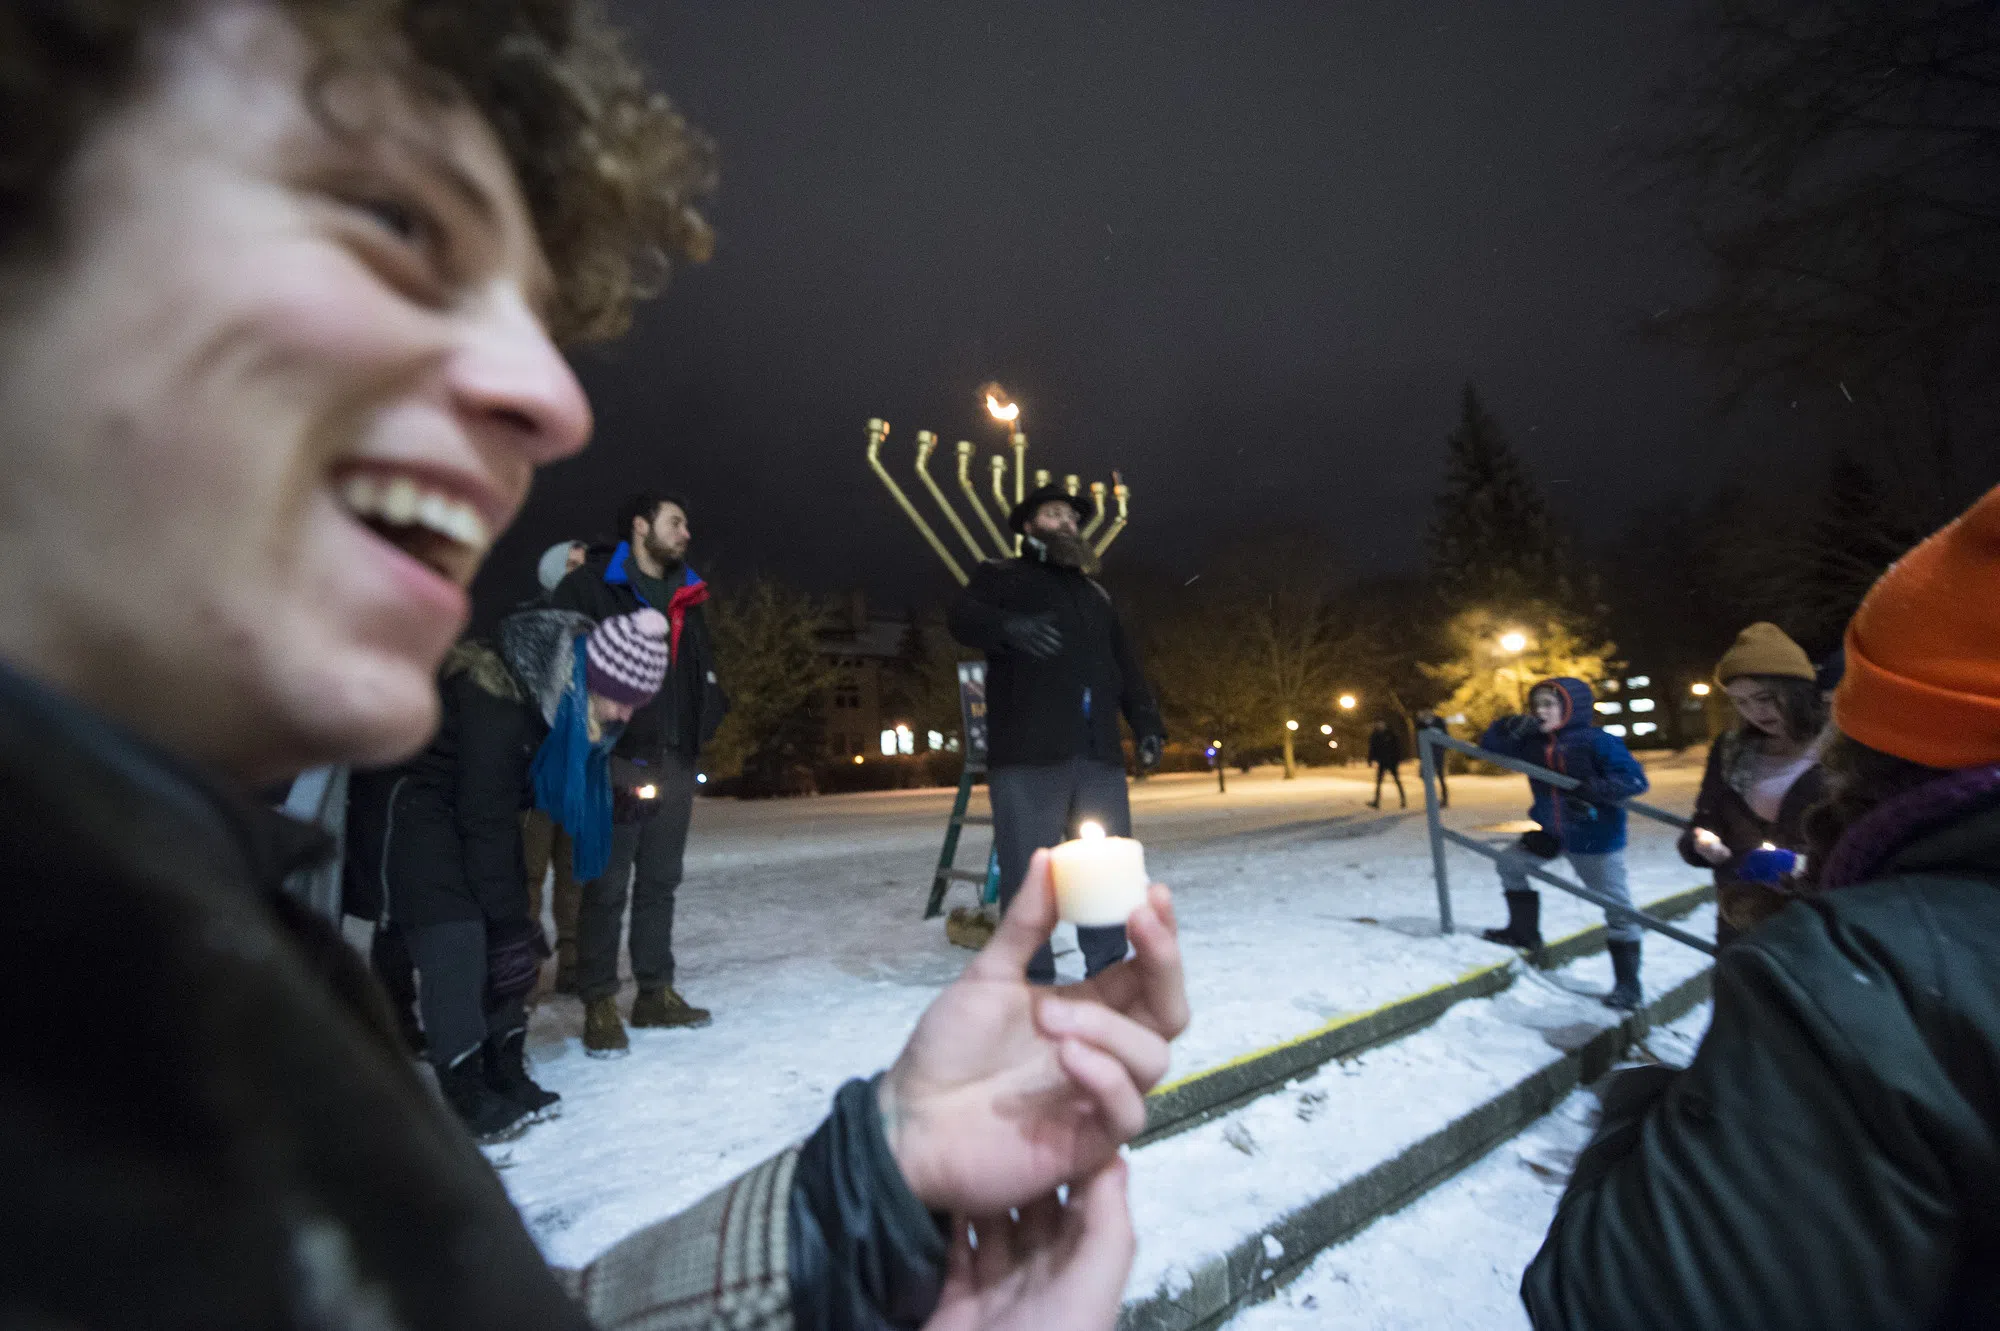 A student smiles with a small candle as the large menorah for Hanukkah is lit in the background.